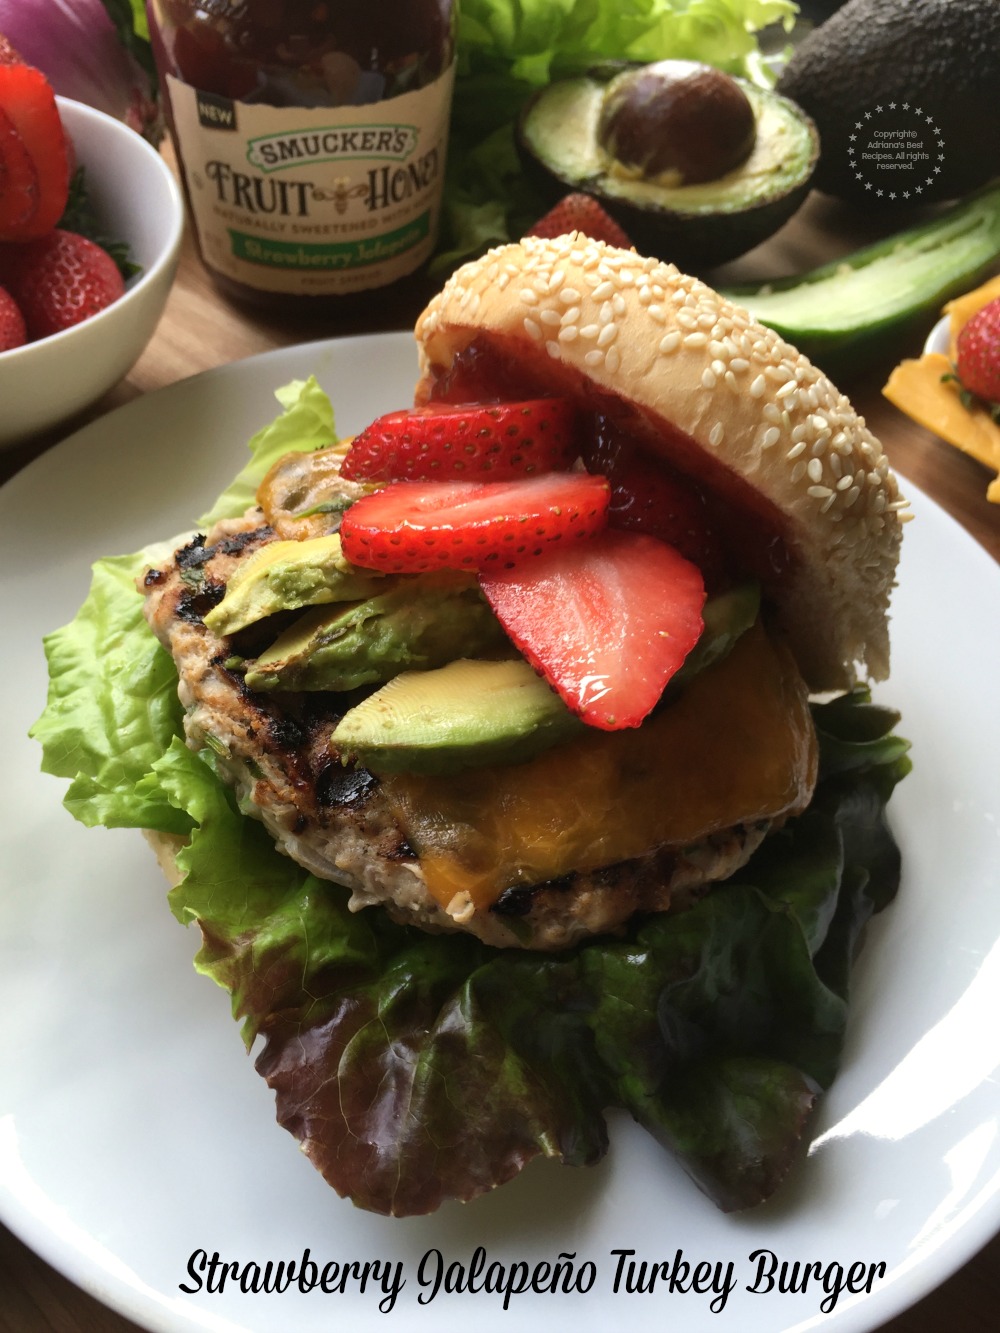 Strawberry Jalapeno Turkey Burger with the perfect balance of sweet, spicy and savory